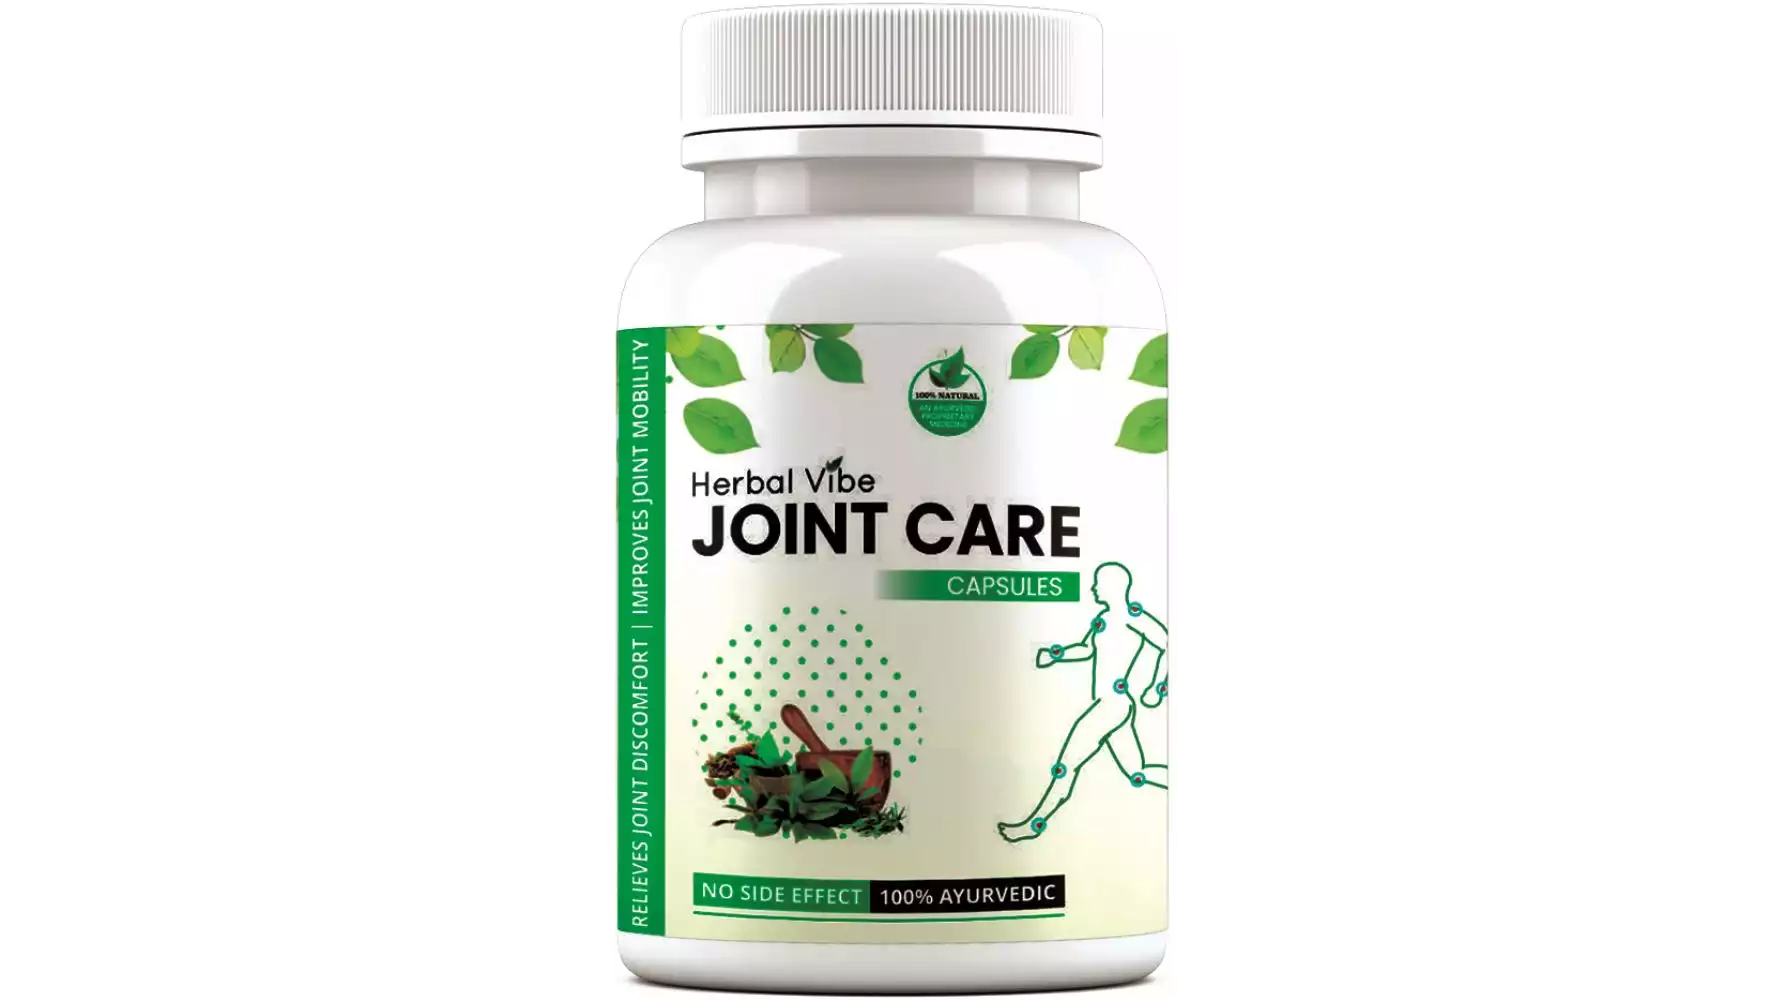 Herbal Vibe Joint Care Pain Relief Capsules (30caps)